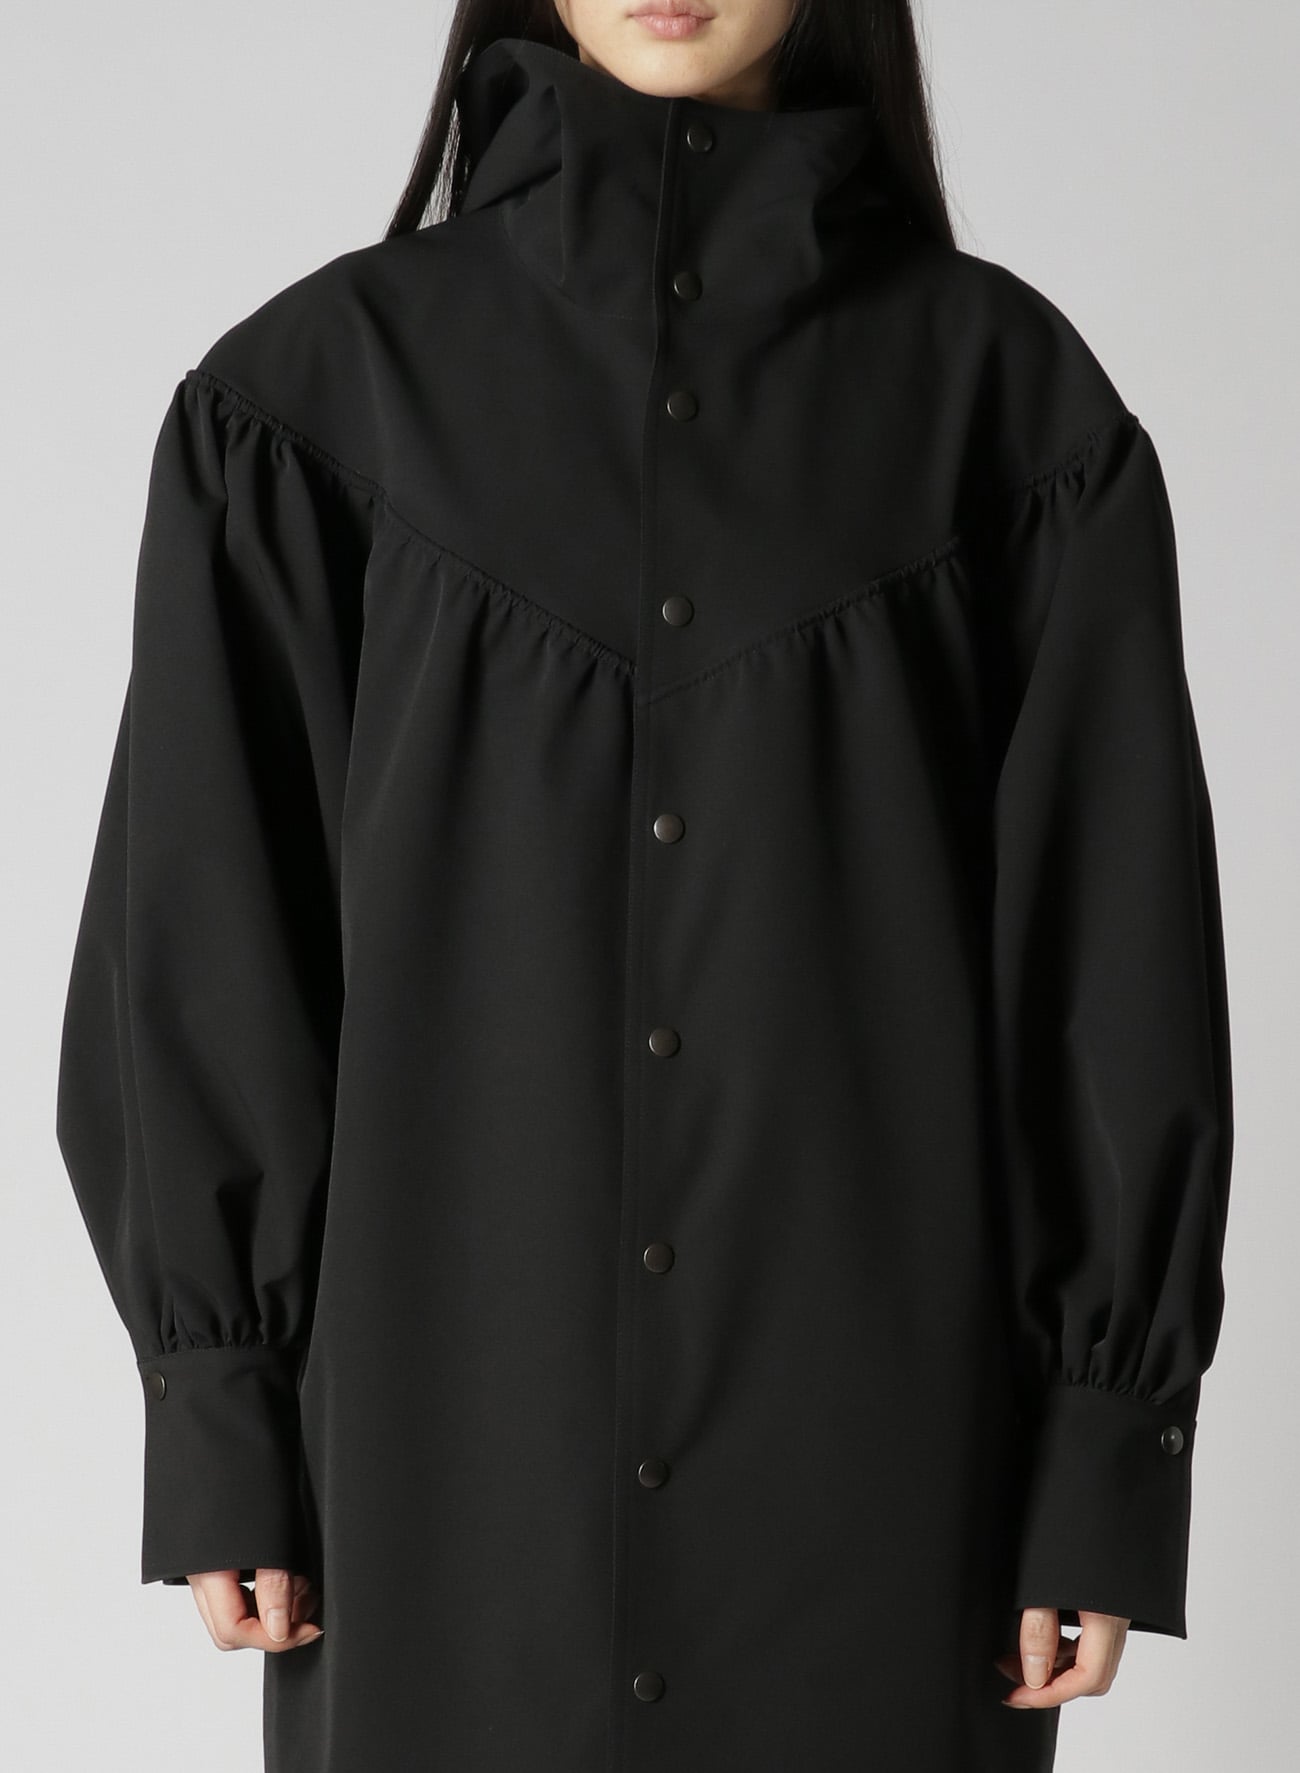 WATER REPELLENT POLYESTER STRETCH RAINCOAT